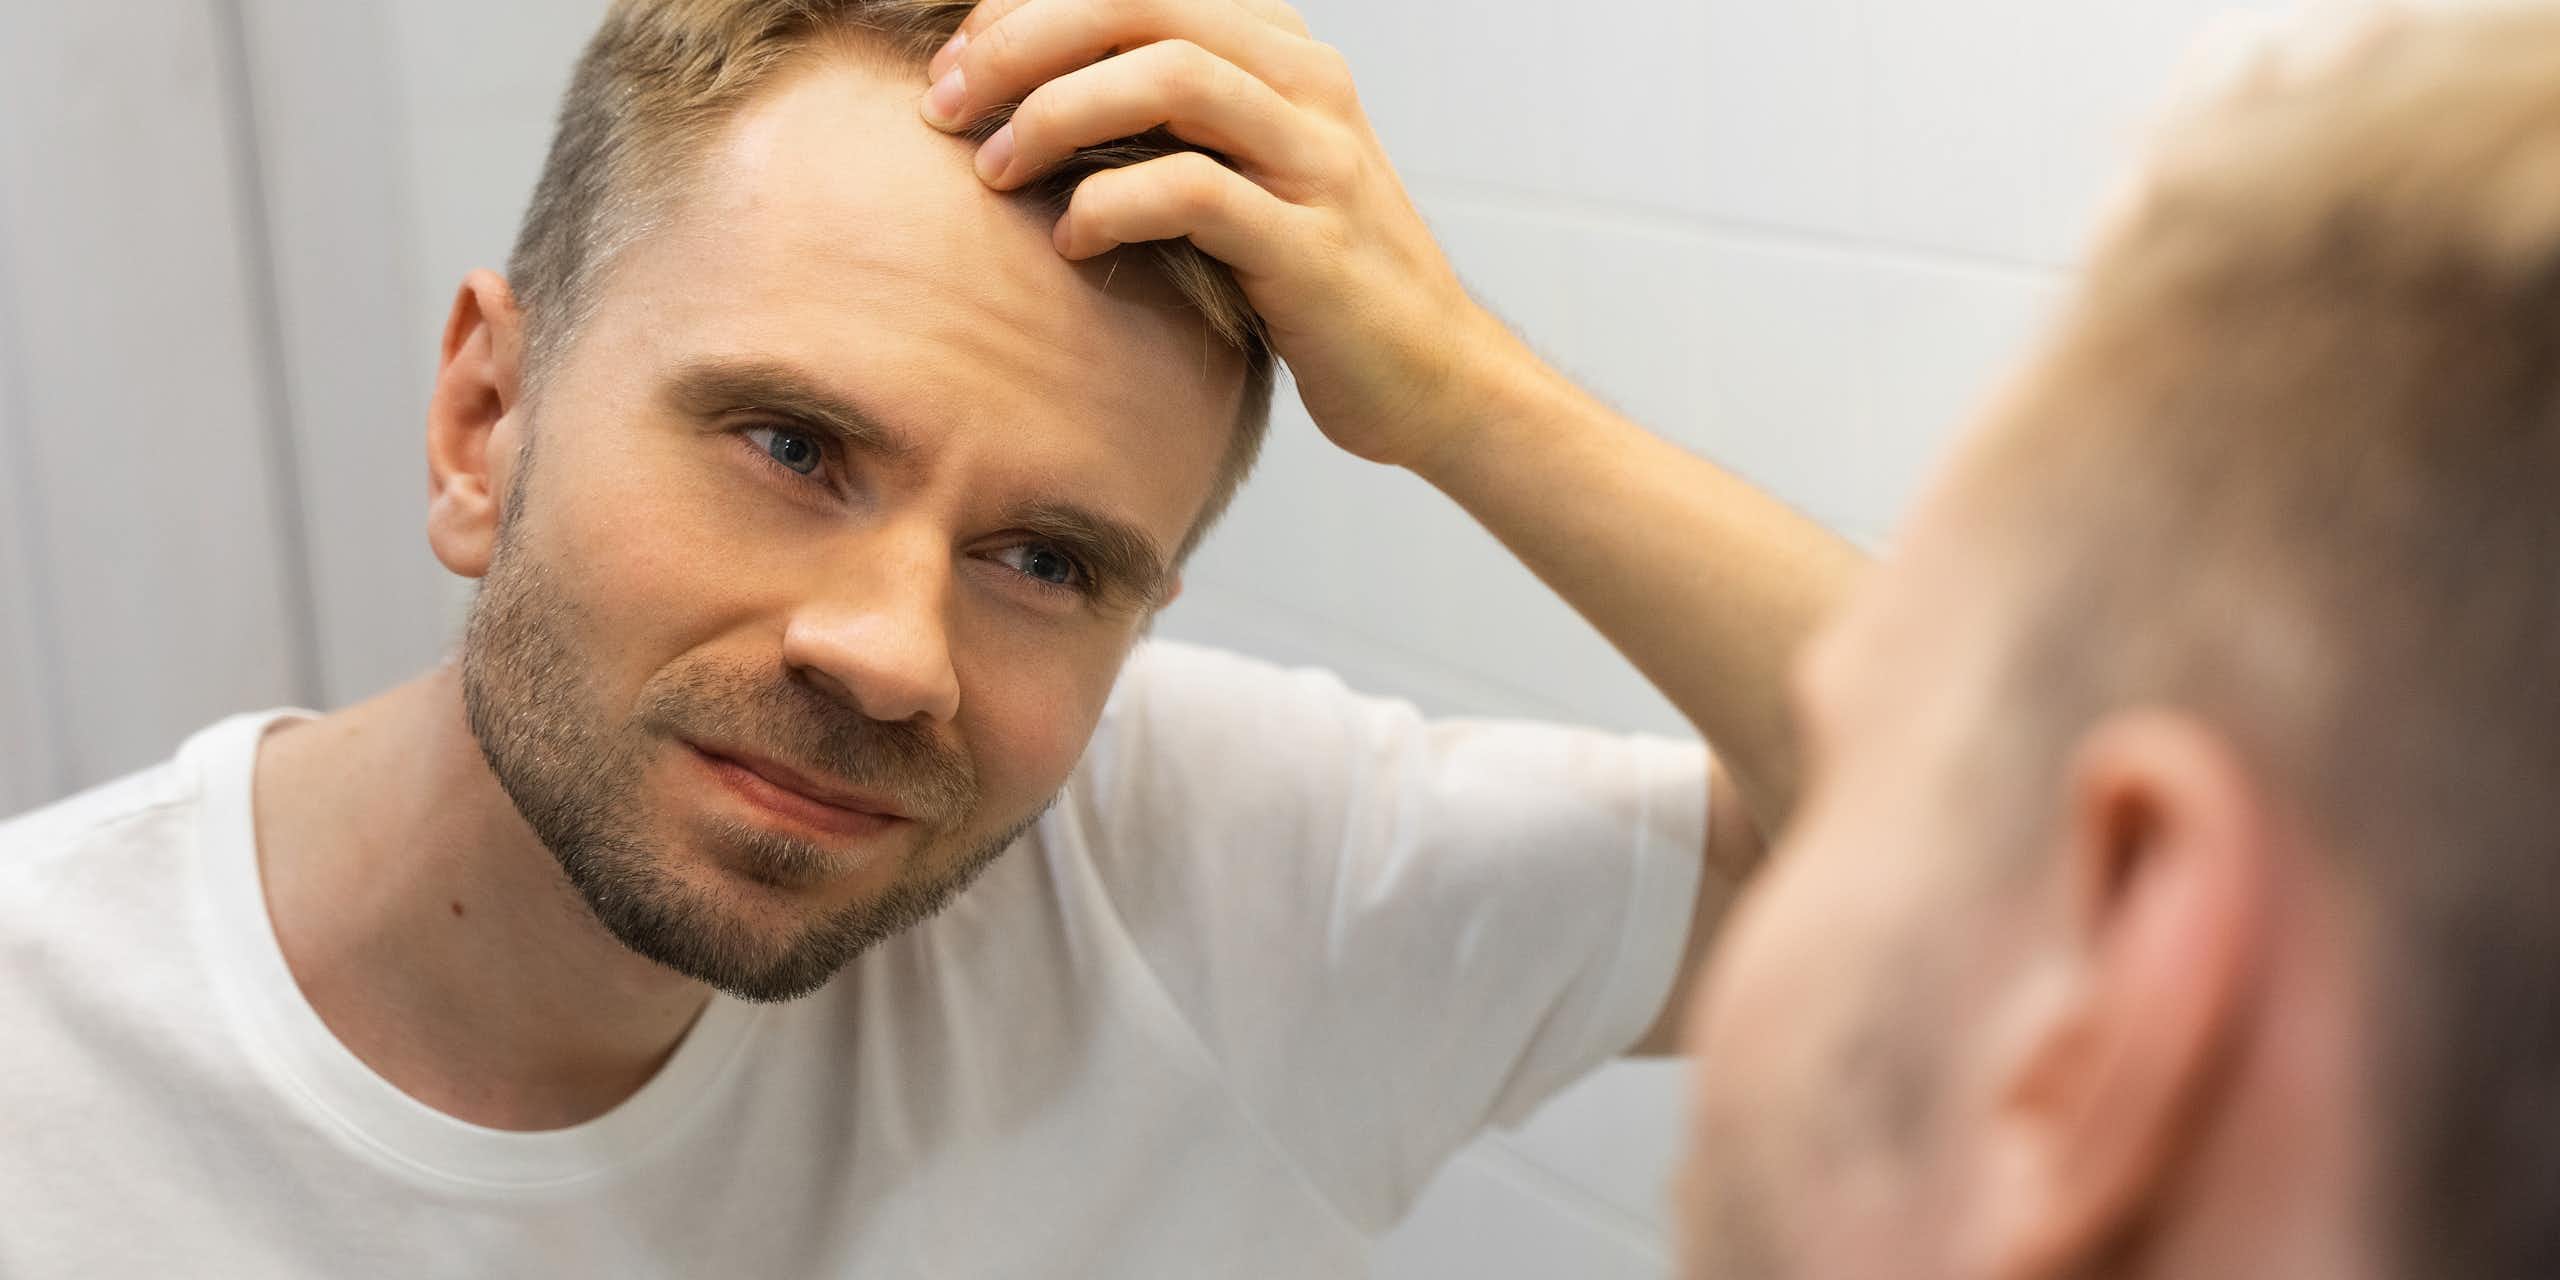 Male baldness is often trivialised – our research shows it should be taken seriously